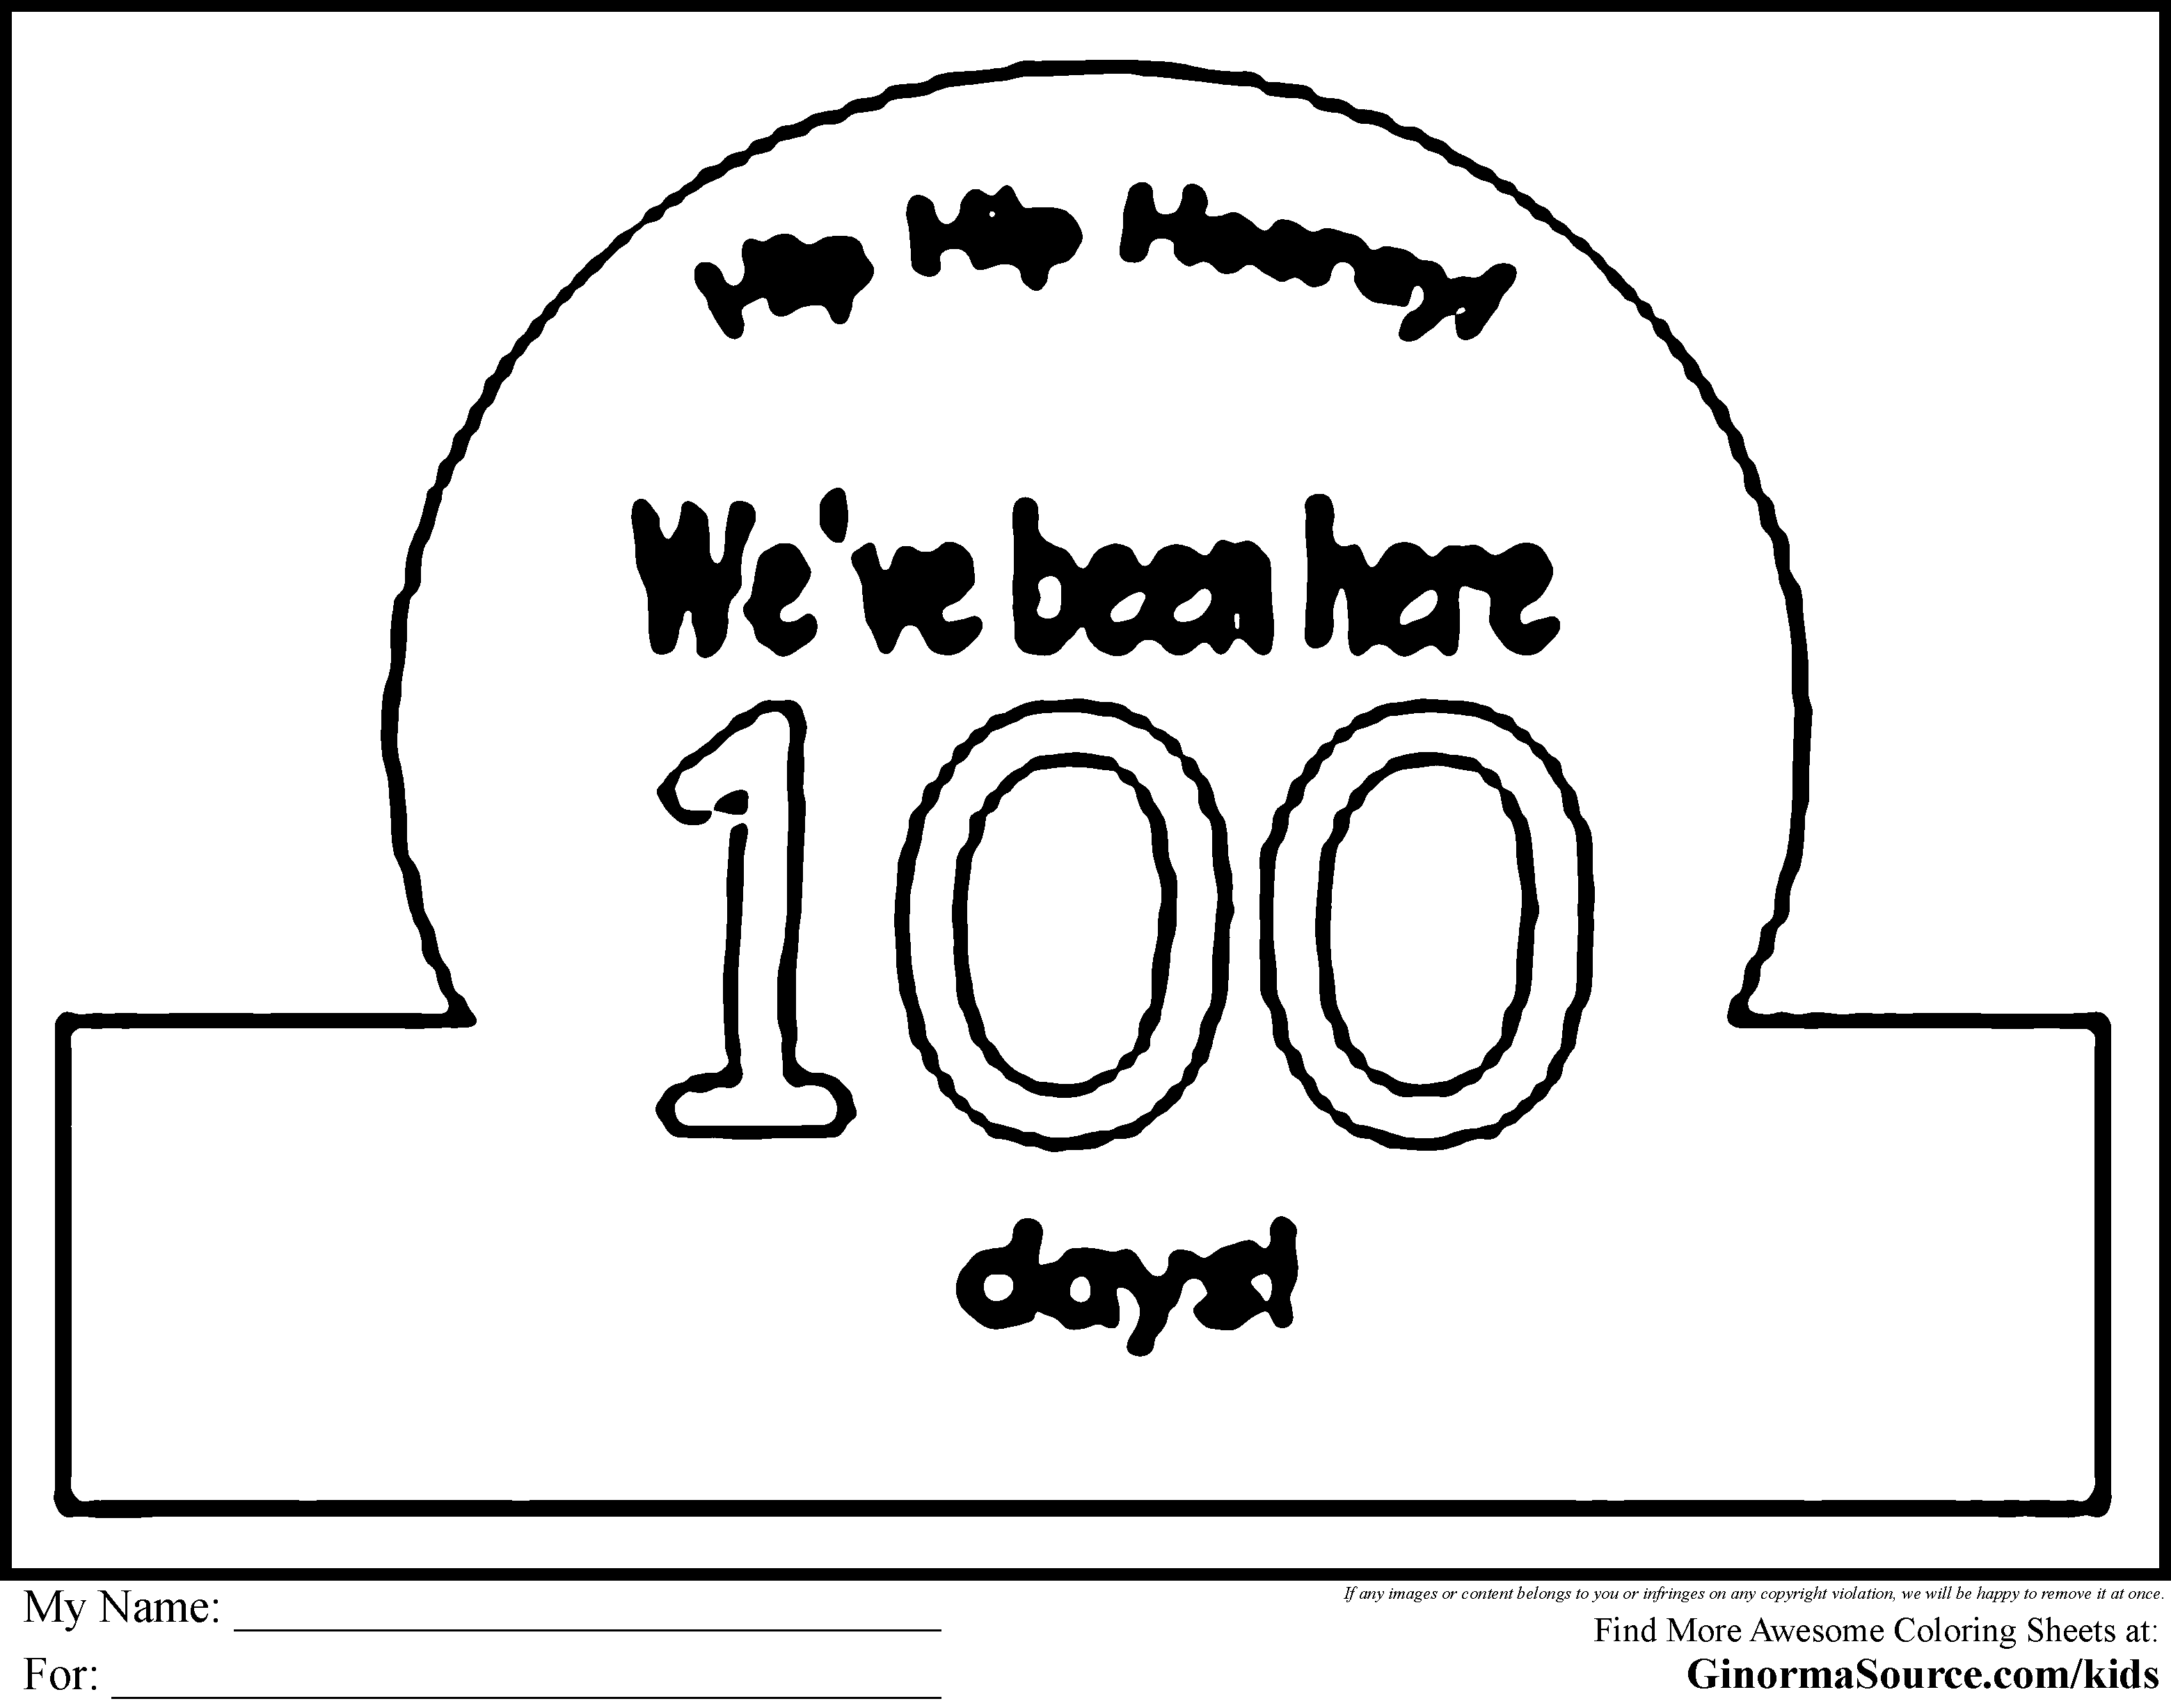 46-lovely-images-100th-day-of-school-activities-coloring-pages-mickey-and-minnie-100-days-of